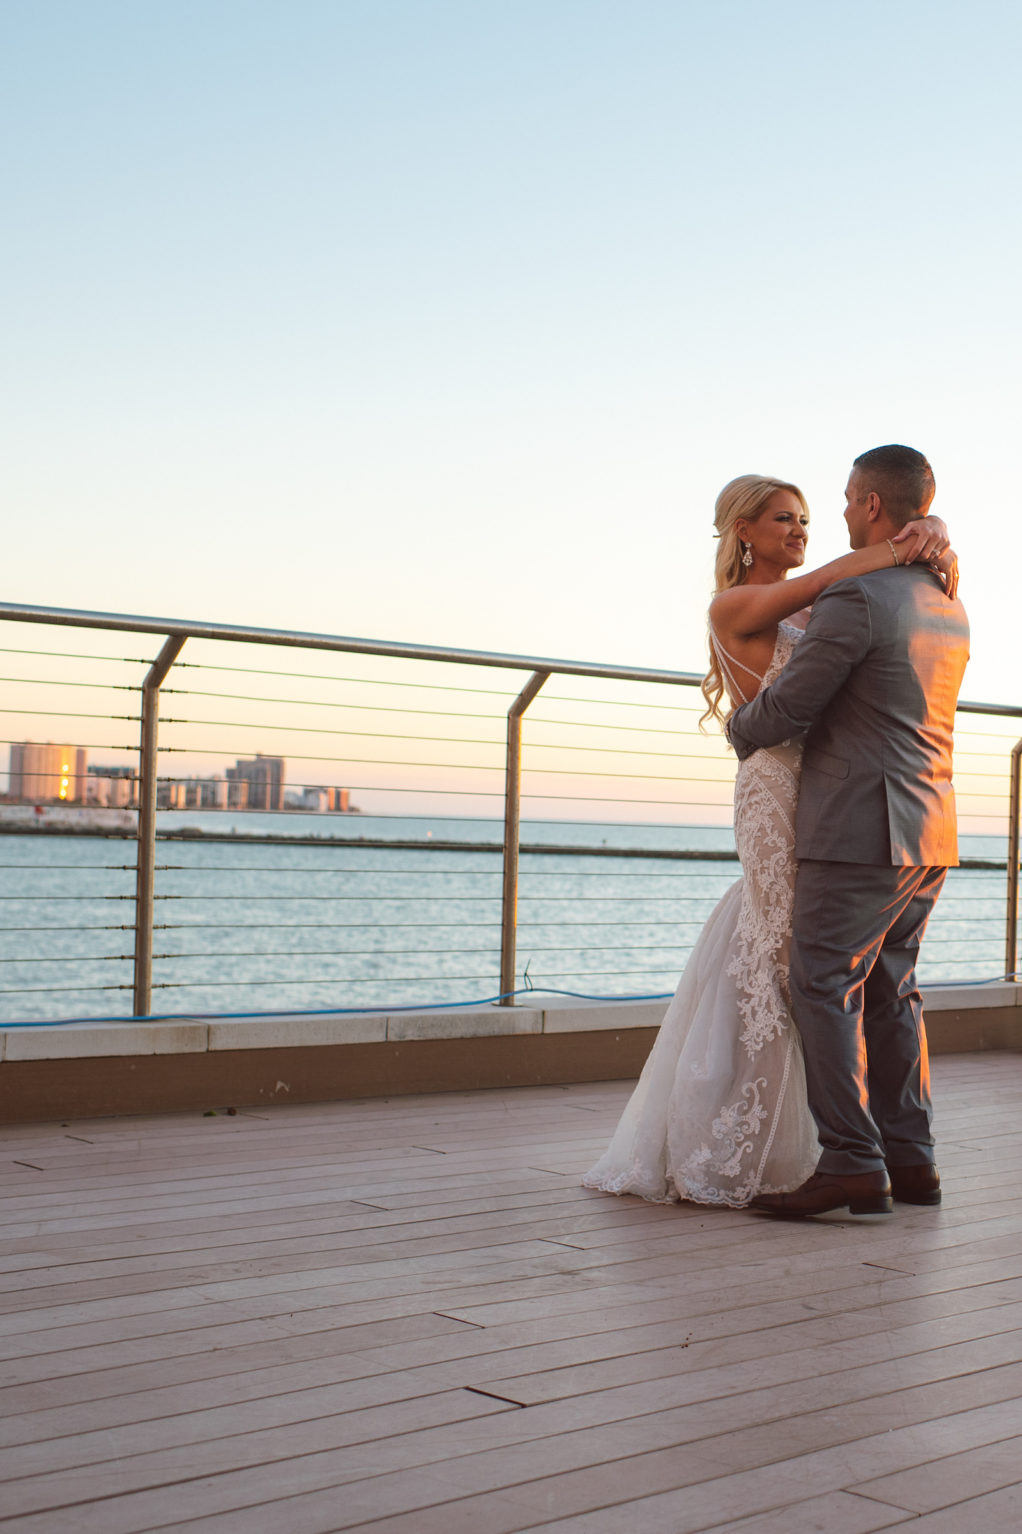 Outdoor Clearwater Beach Hotel Bride and Groom Sunset Portrait | Groom in Classic Grey Suit | Ivory Lace over Champagne Lining Sheath Fit and Flare Bridal Gown Wedding Dress by Essence of Australia